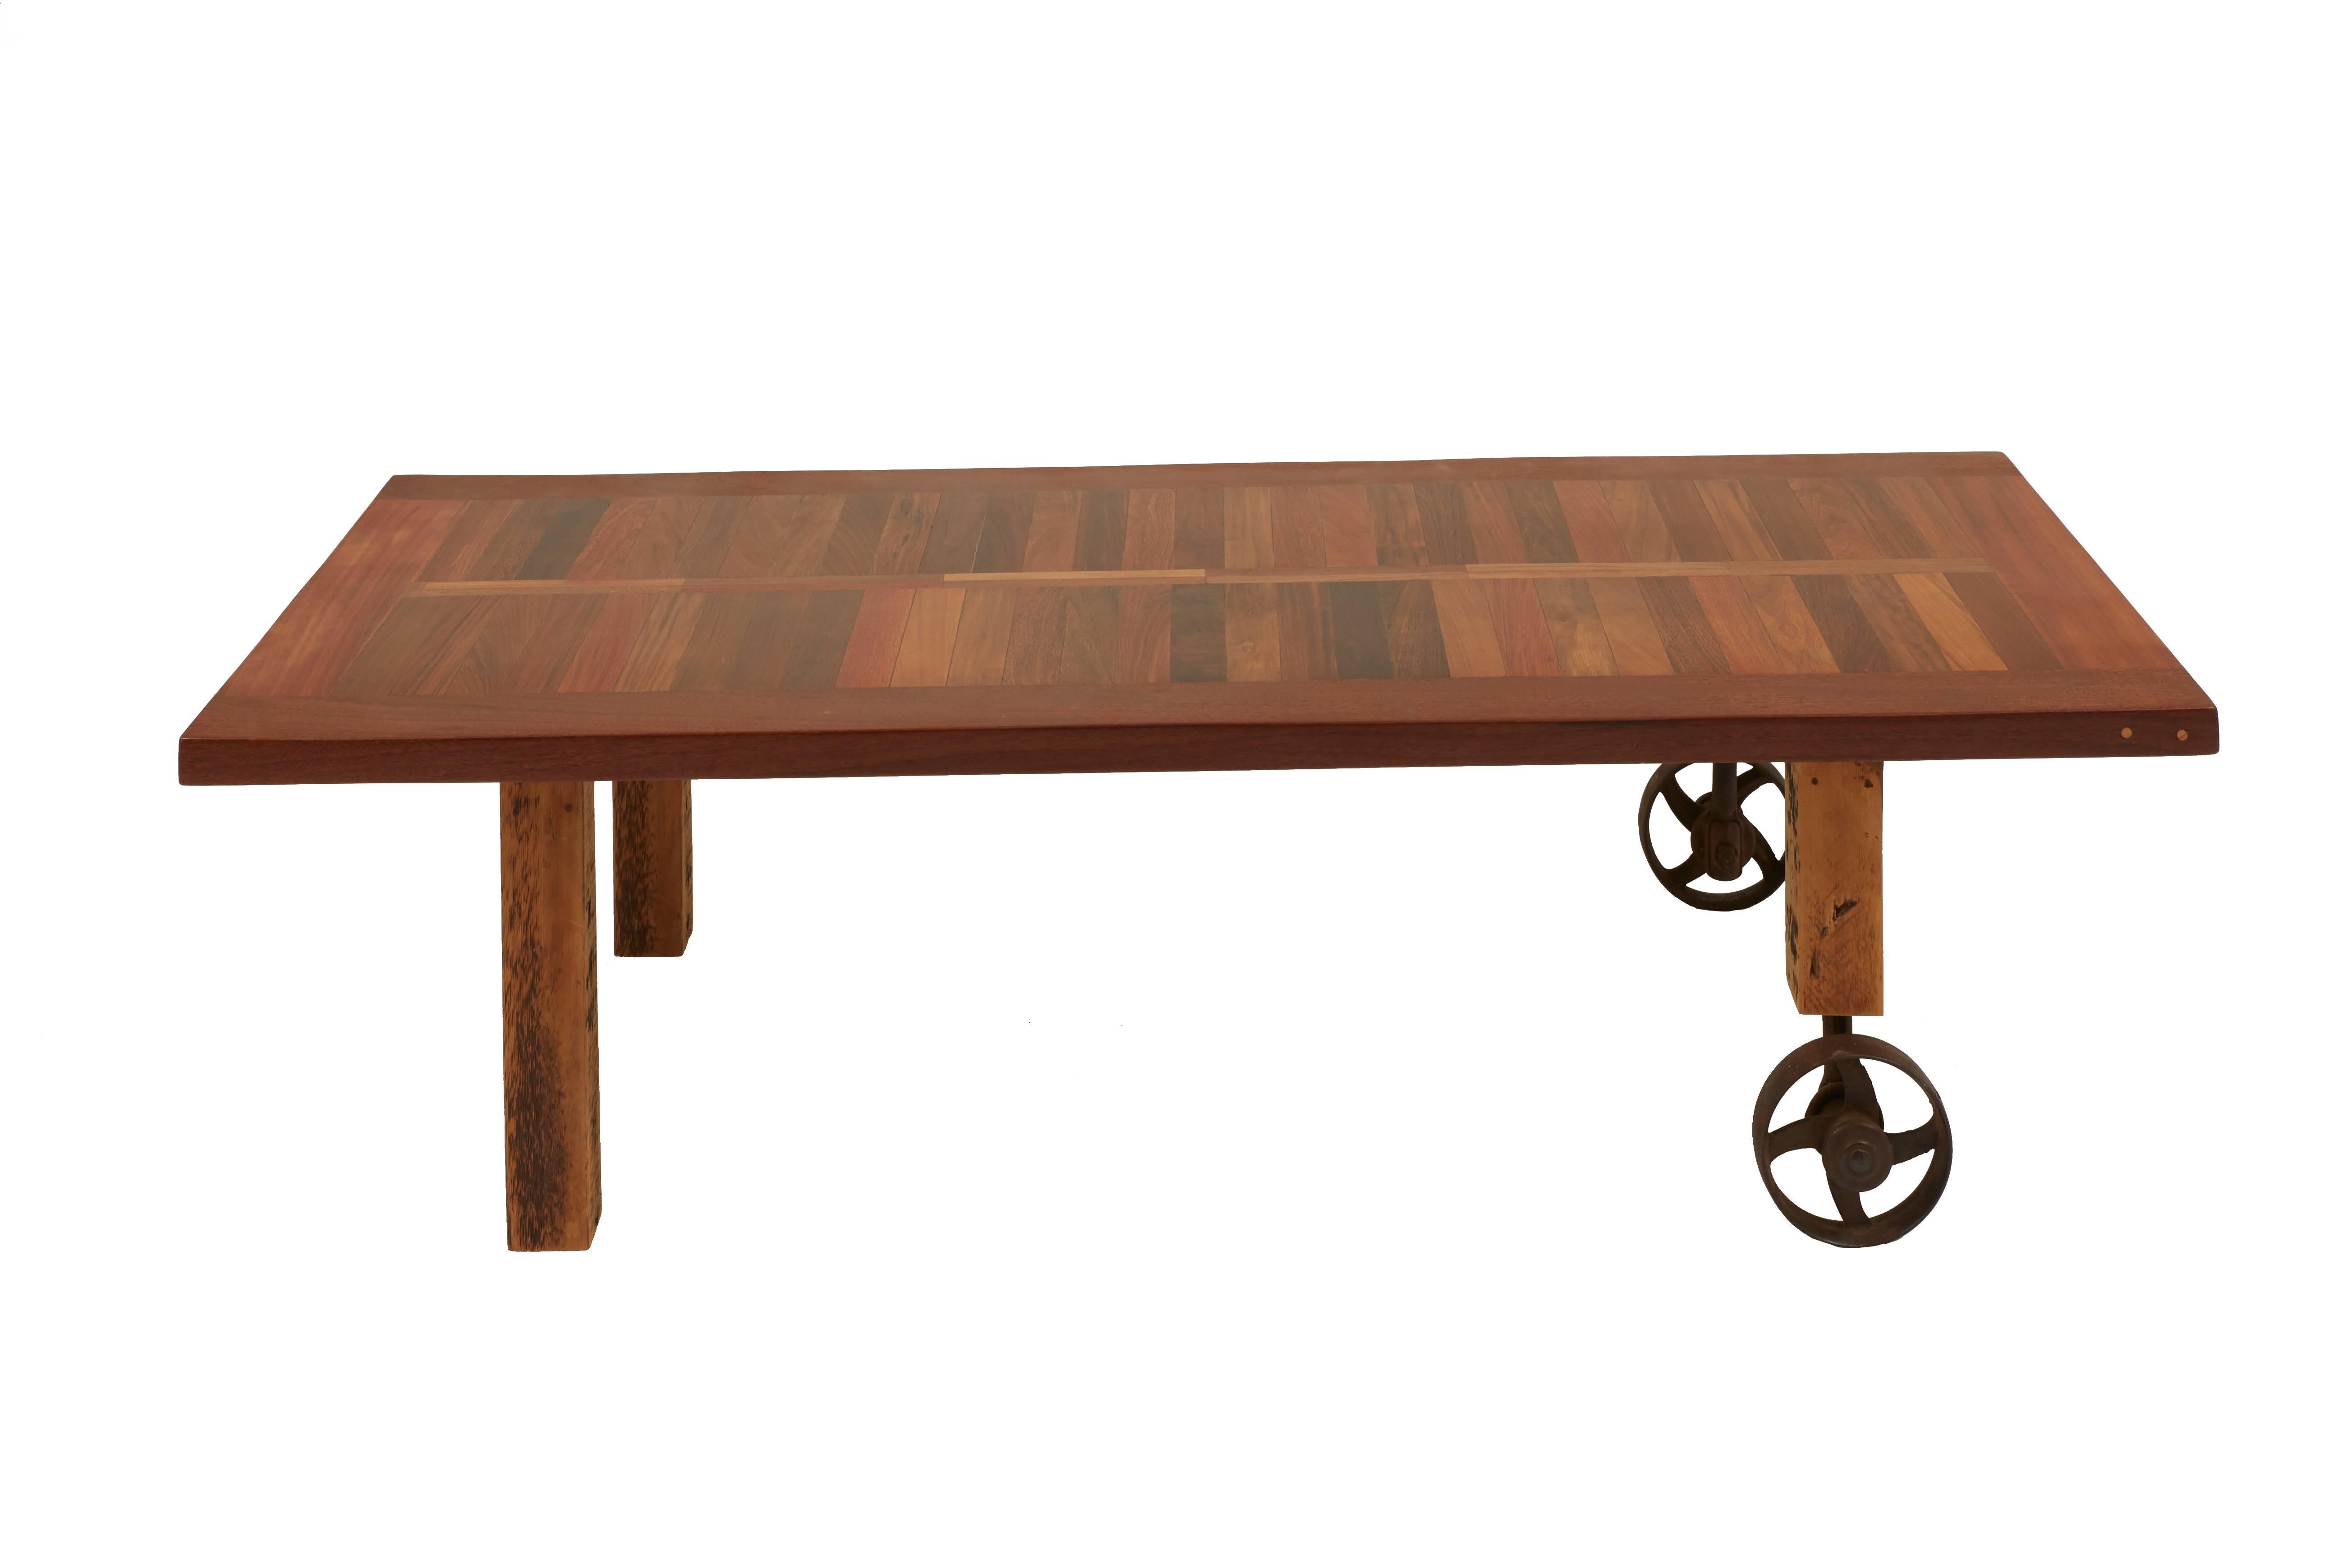 Coffee table made from an old mahogany door, reclaimed Brazilian Ipe, reclaimed Douglas fir and vintage casters.

Handmade in the USA by Mats Christeen.

Established in 2010, Foundrywood is a Queens-based producer of distinctive, handcrafted